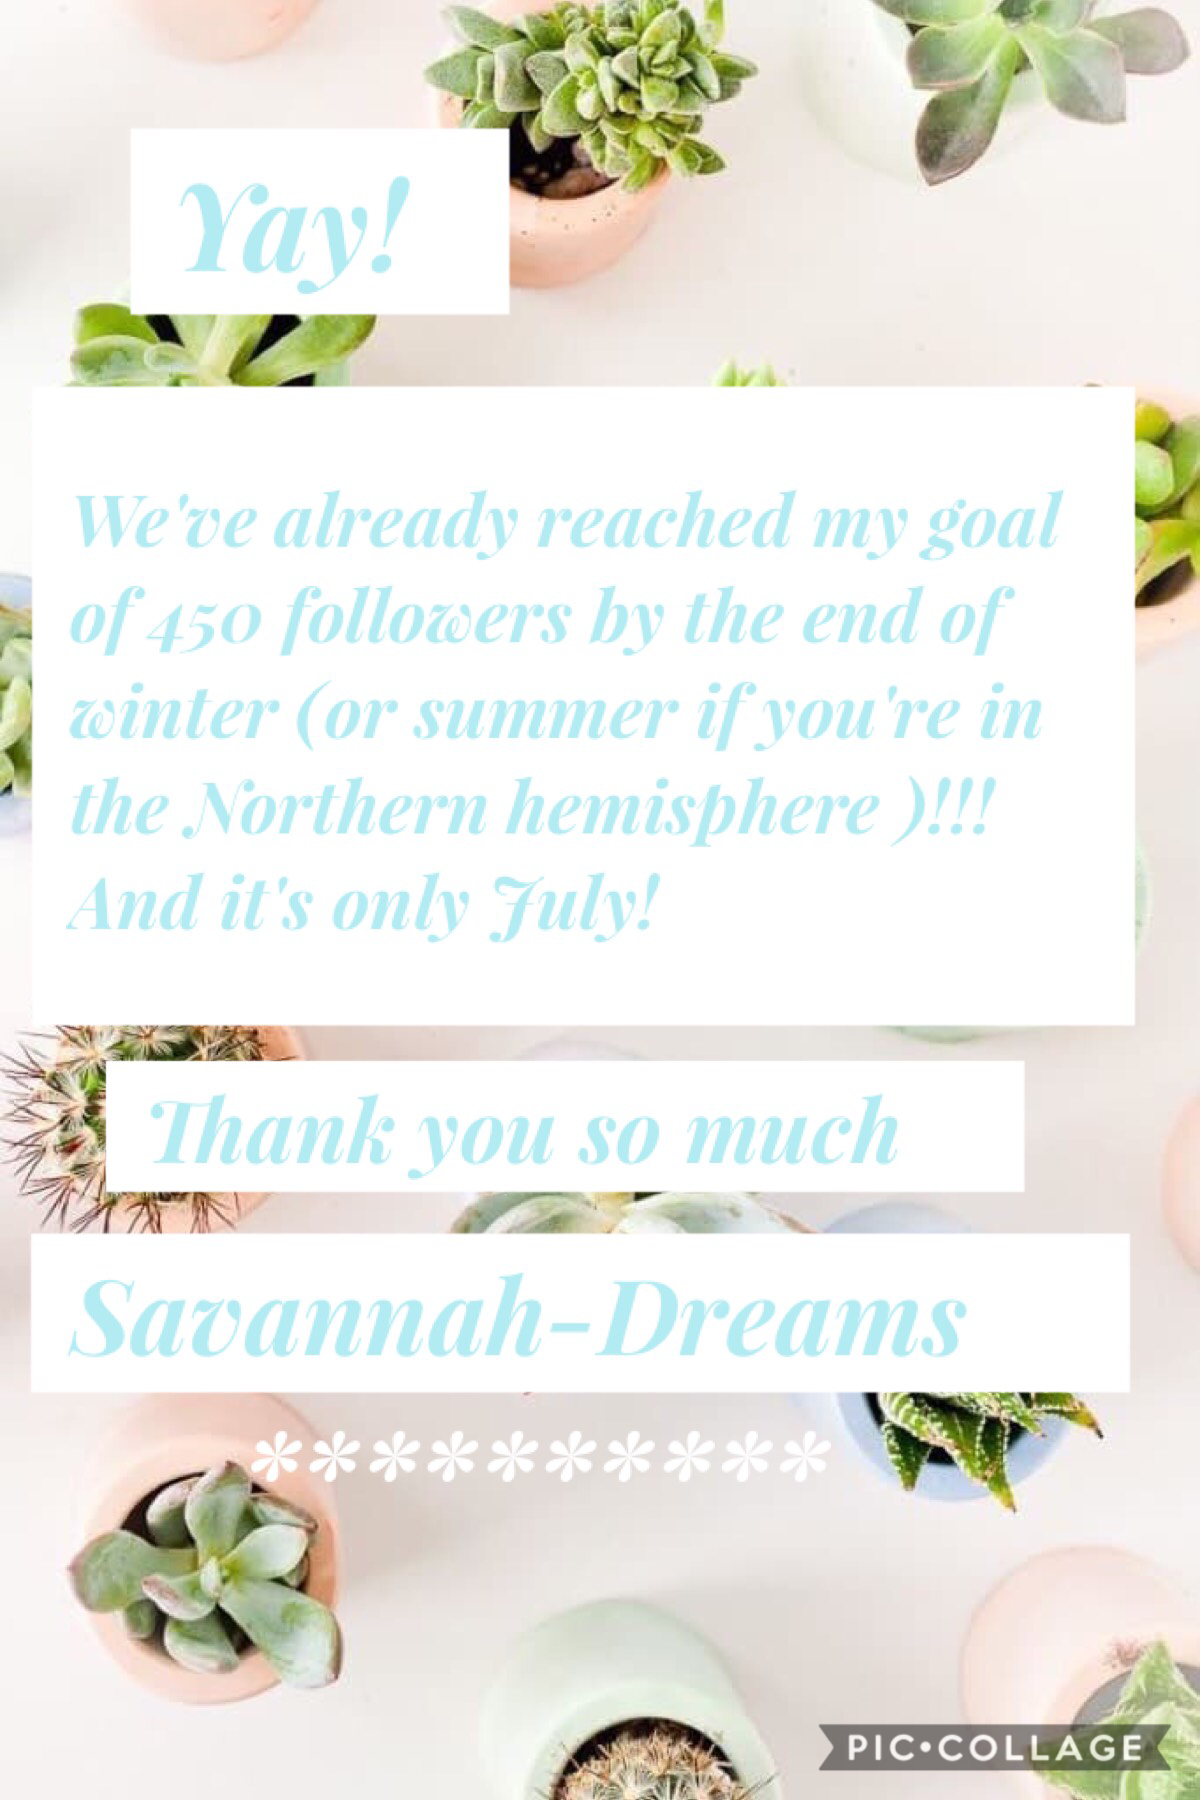 ♡tap♡ 
Thank you to my 451st follower, SUMMER-ISABELLE, for the background. Go follow her! :)